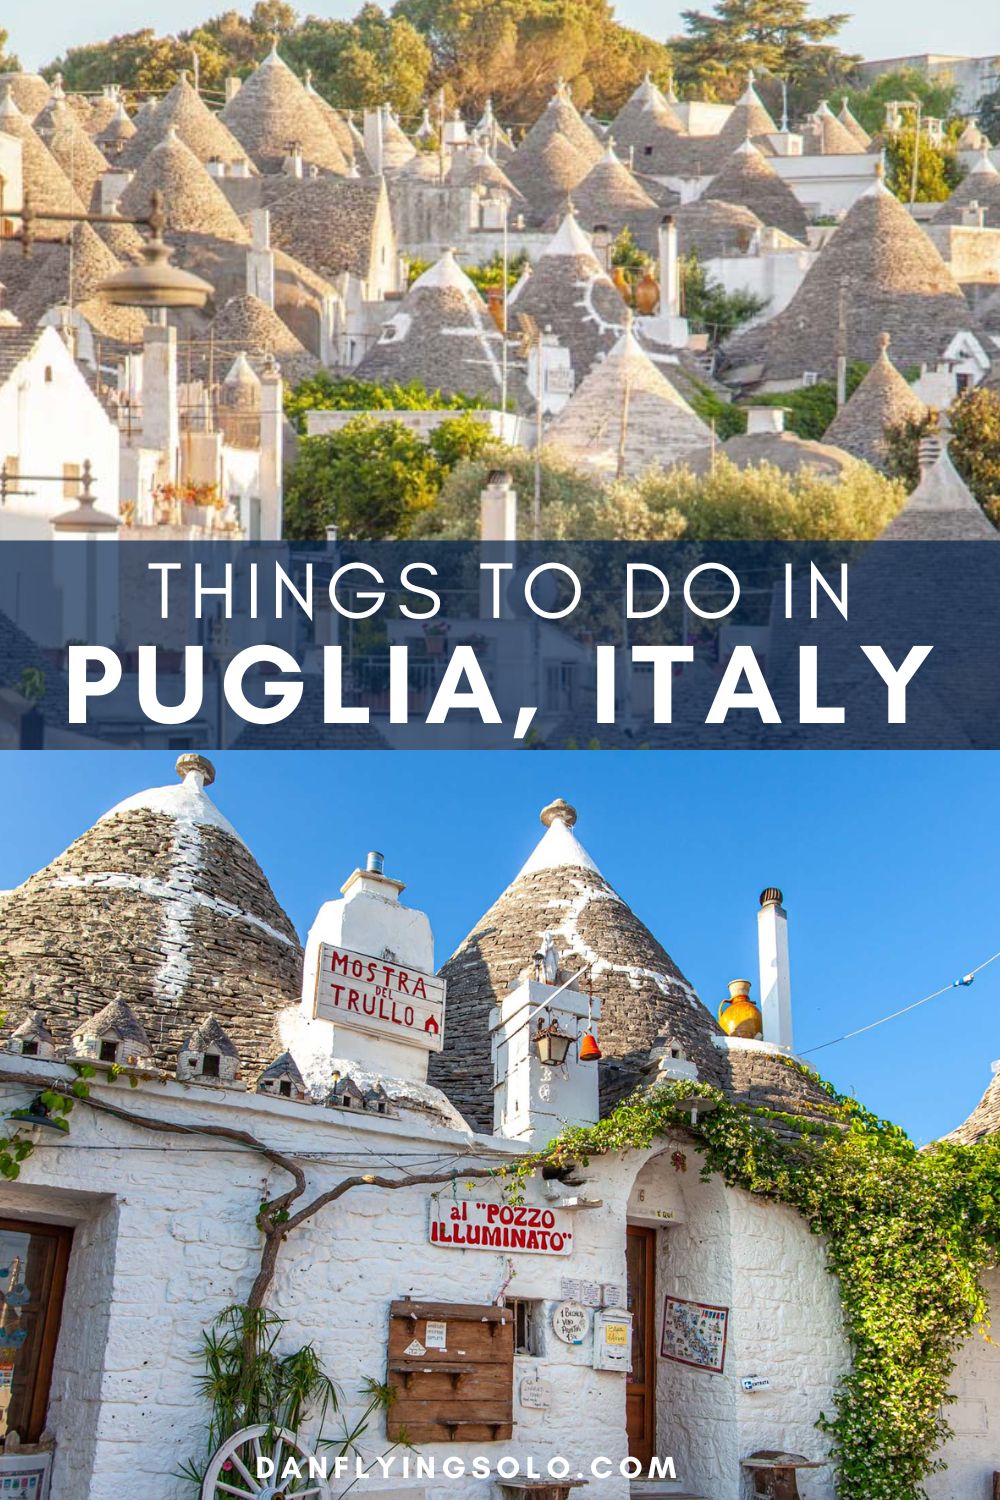 Discover the top things to do in Puglia and best places to visit, such as Alberobello, Lecce, Locorotondo and Polignano a Mare in this guide.